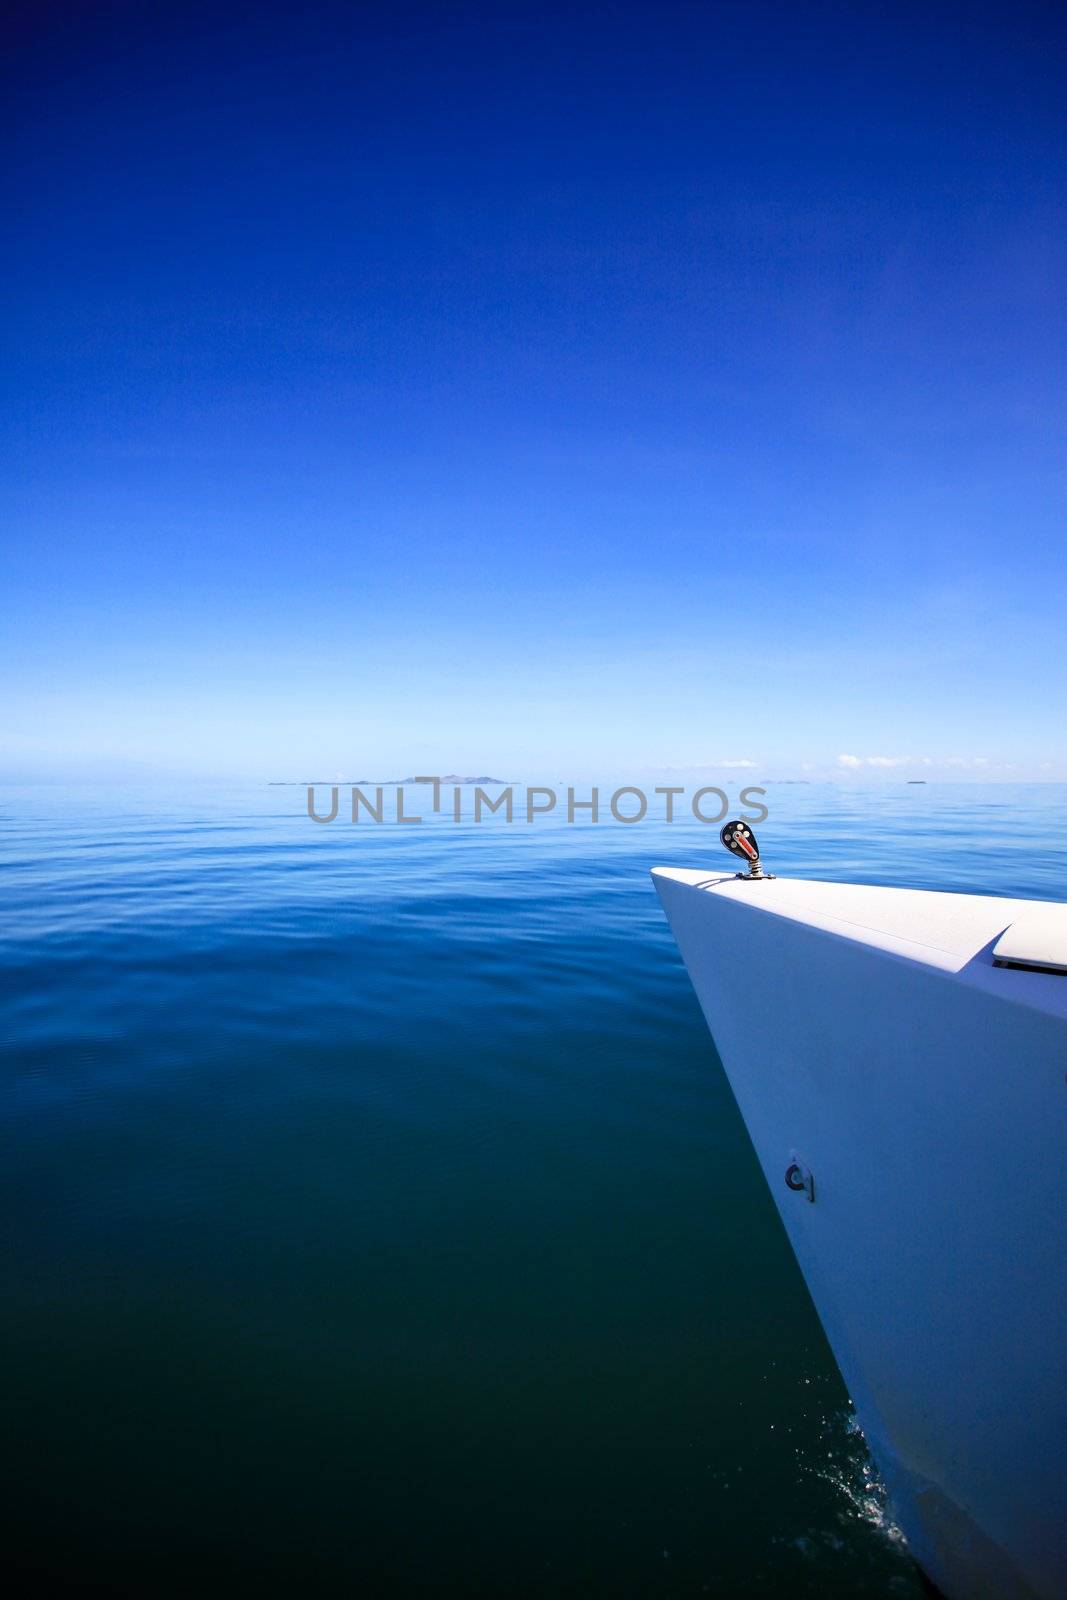 View of the bow of a sailing boat in calm blue sea.